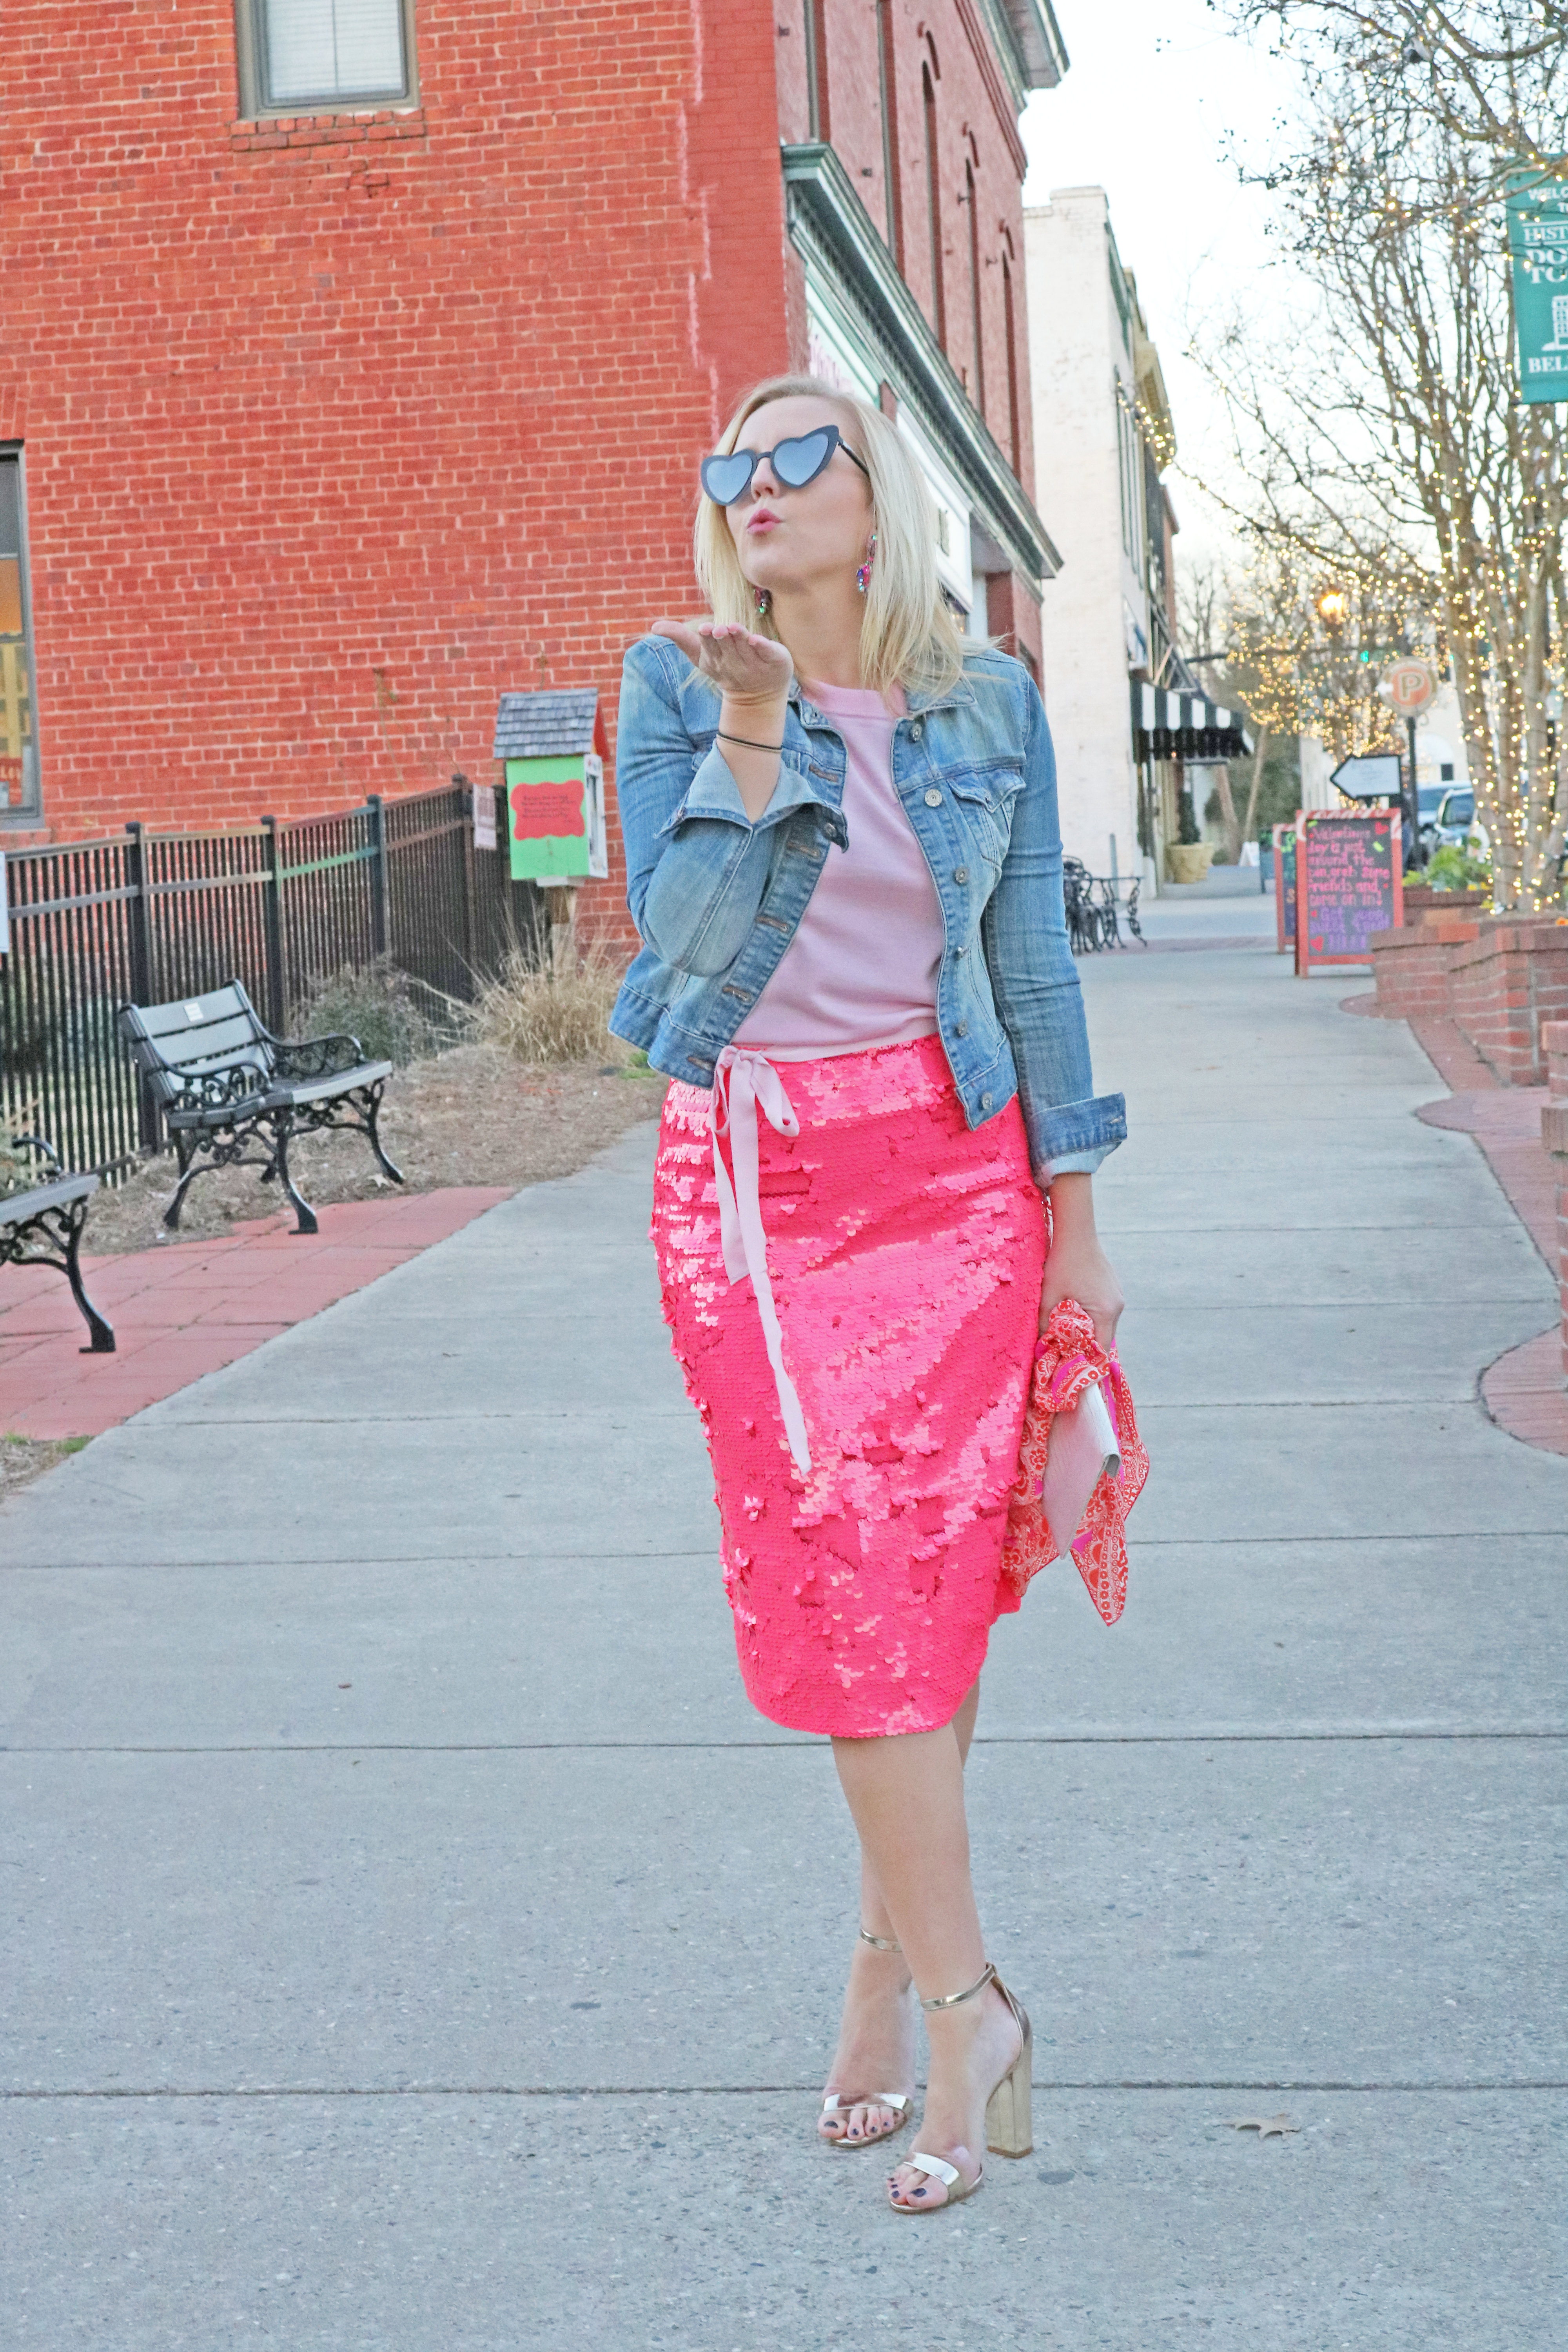 Hot Pink Sequin Skirt on Taylor Reese - Reese's Hardwear